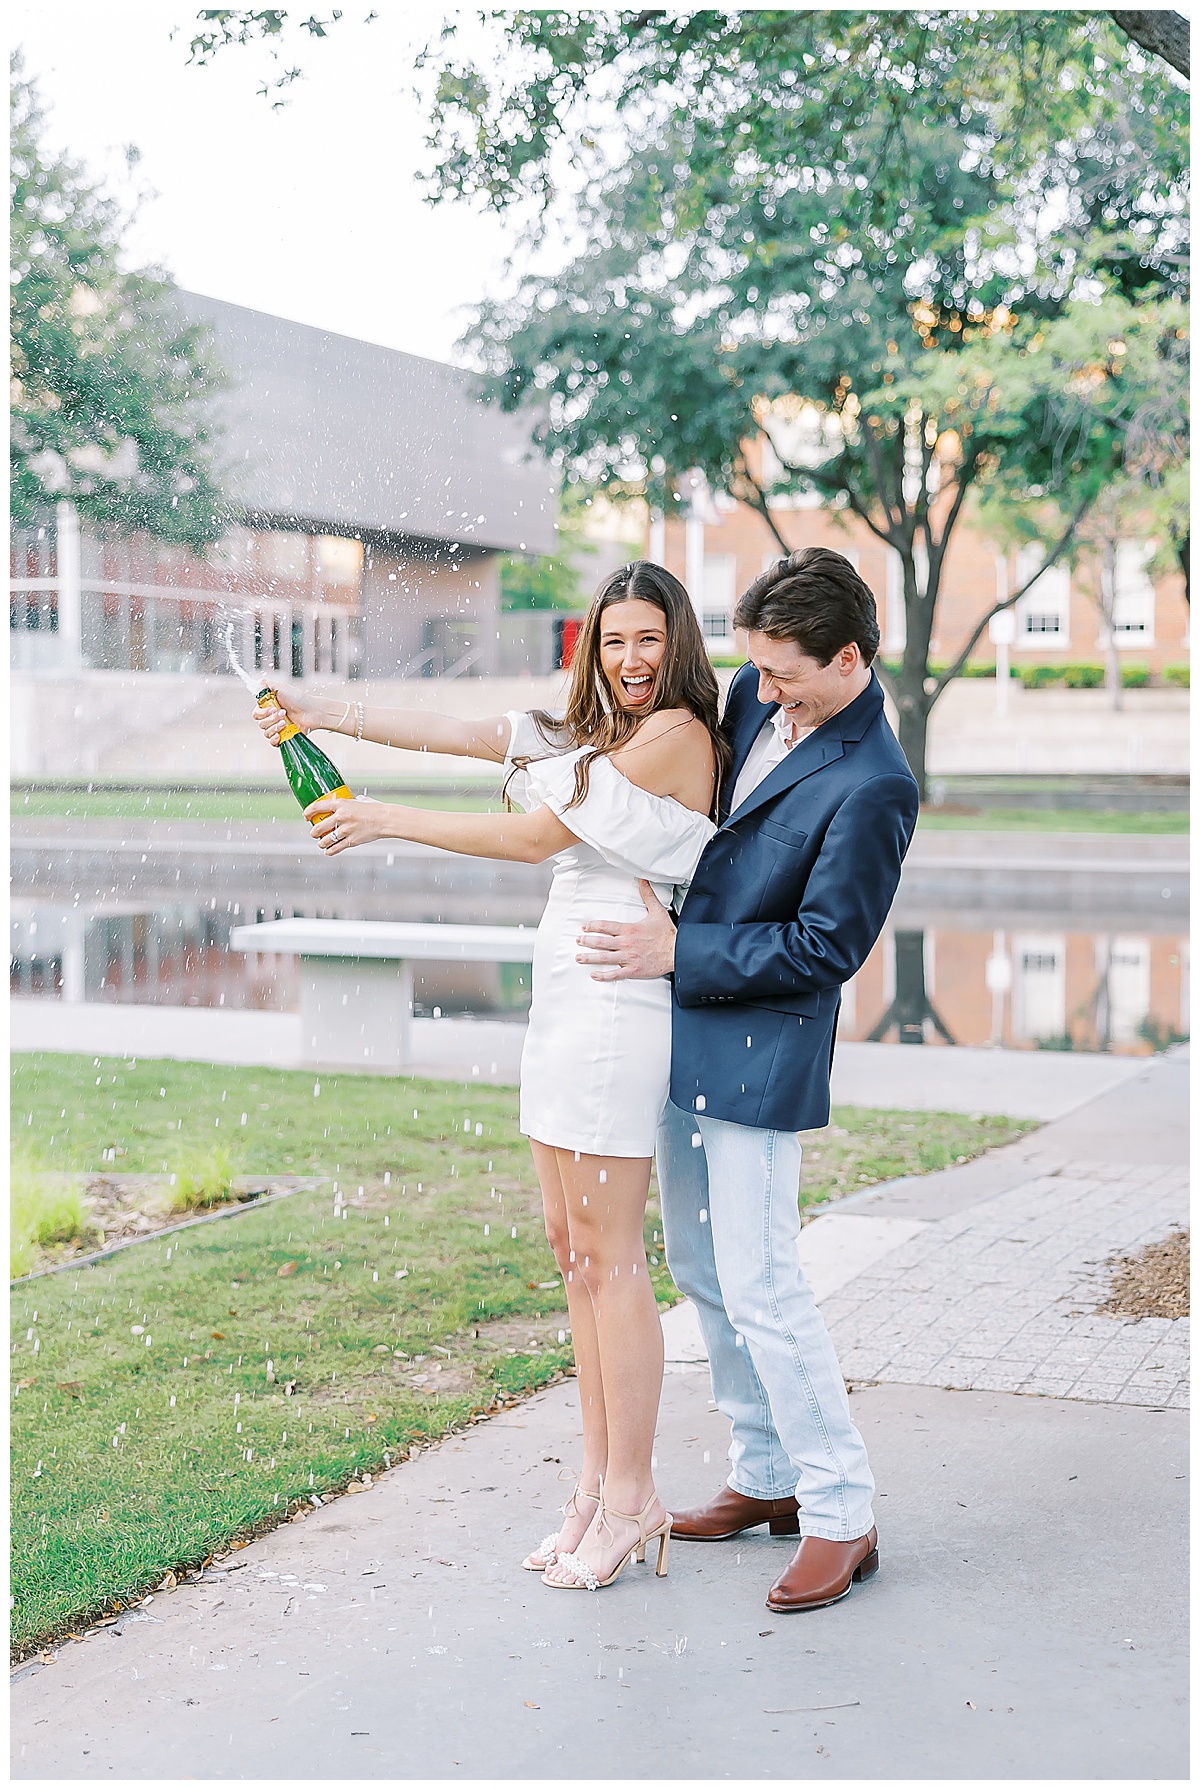 Abbie and Brandon's Dallas engagement session at Winspear Opera House.